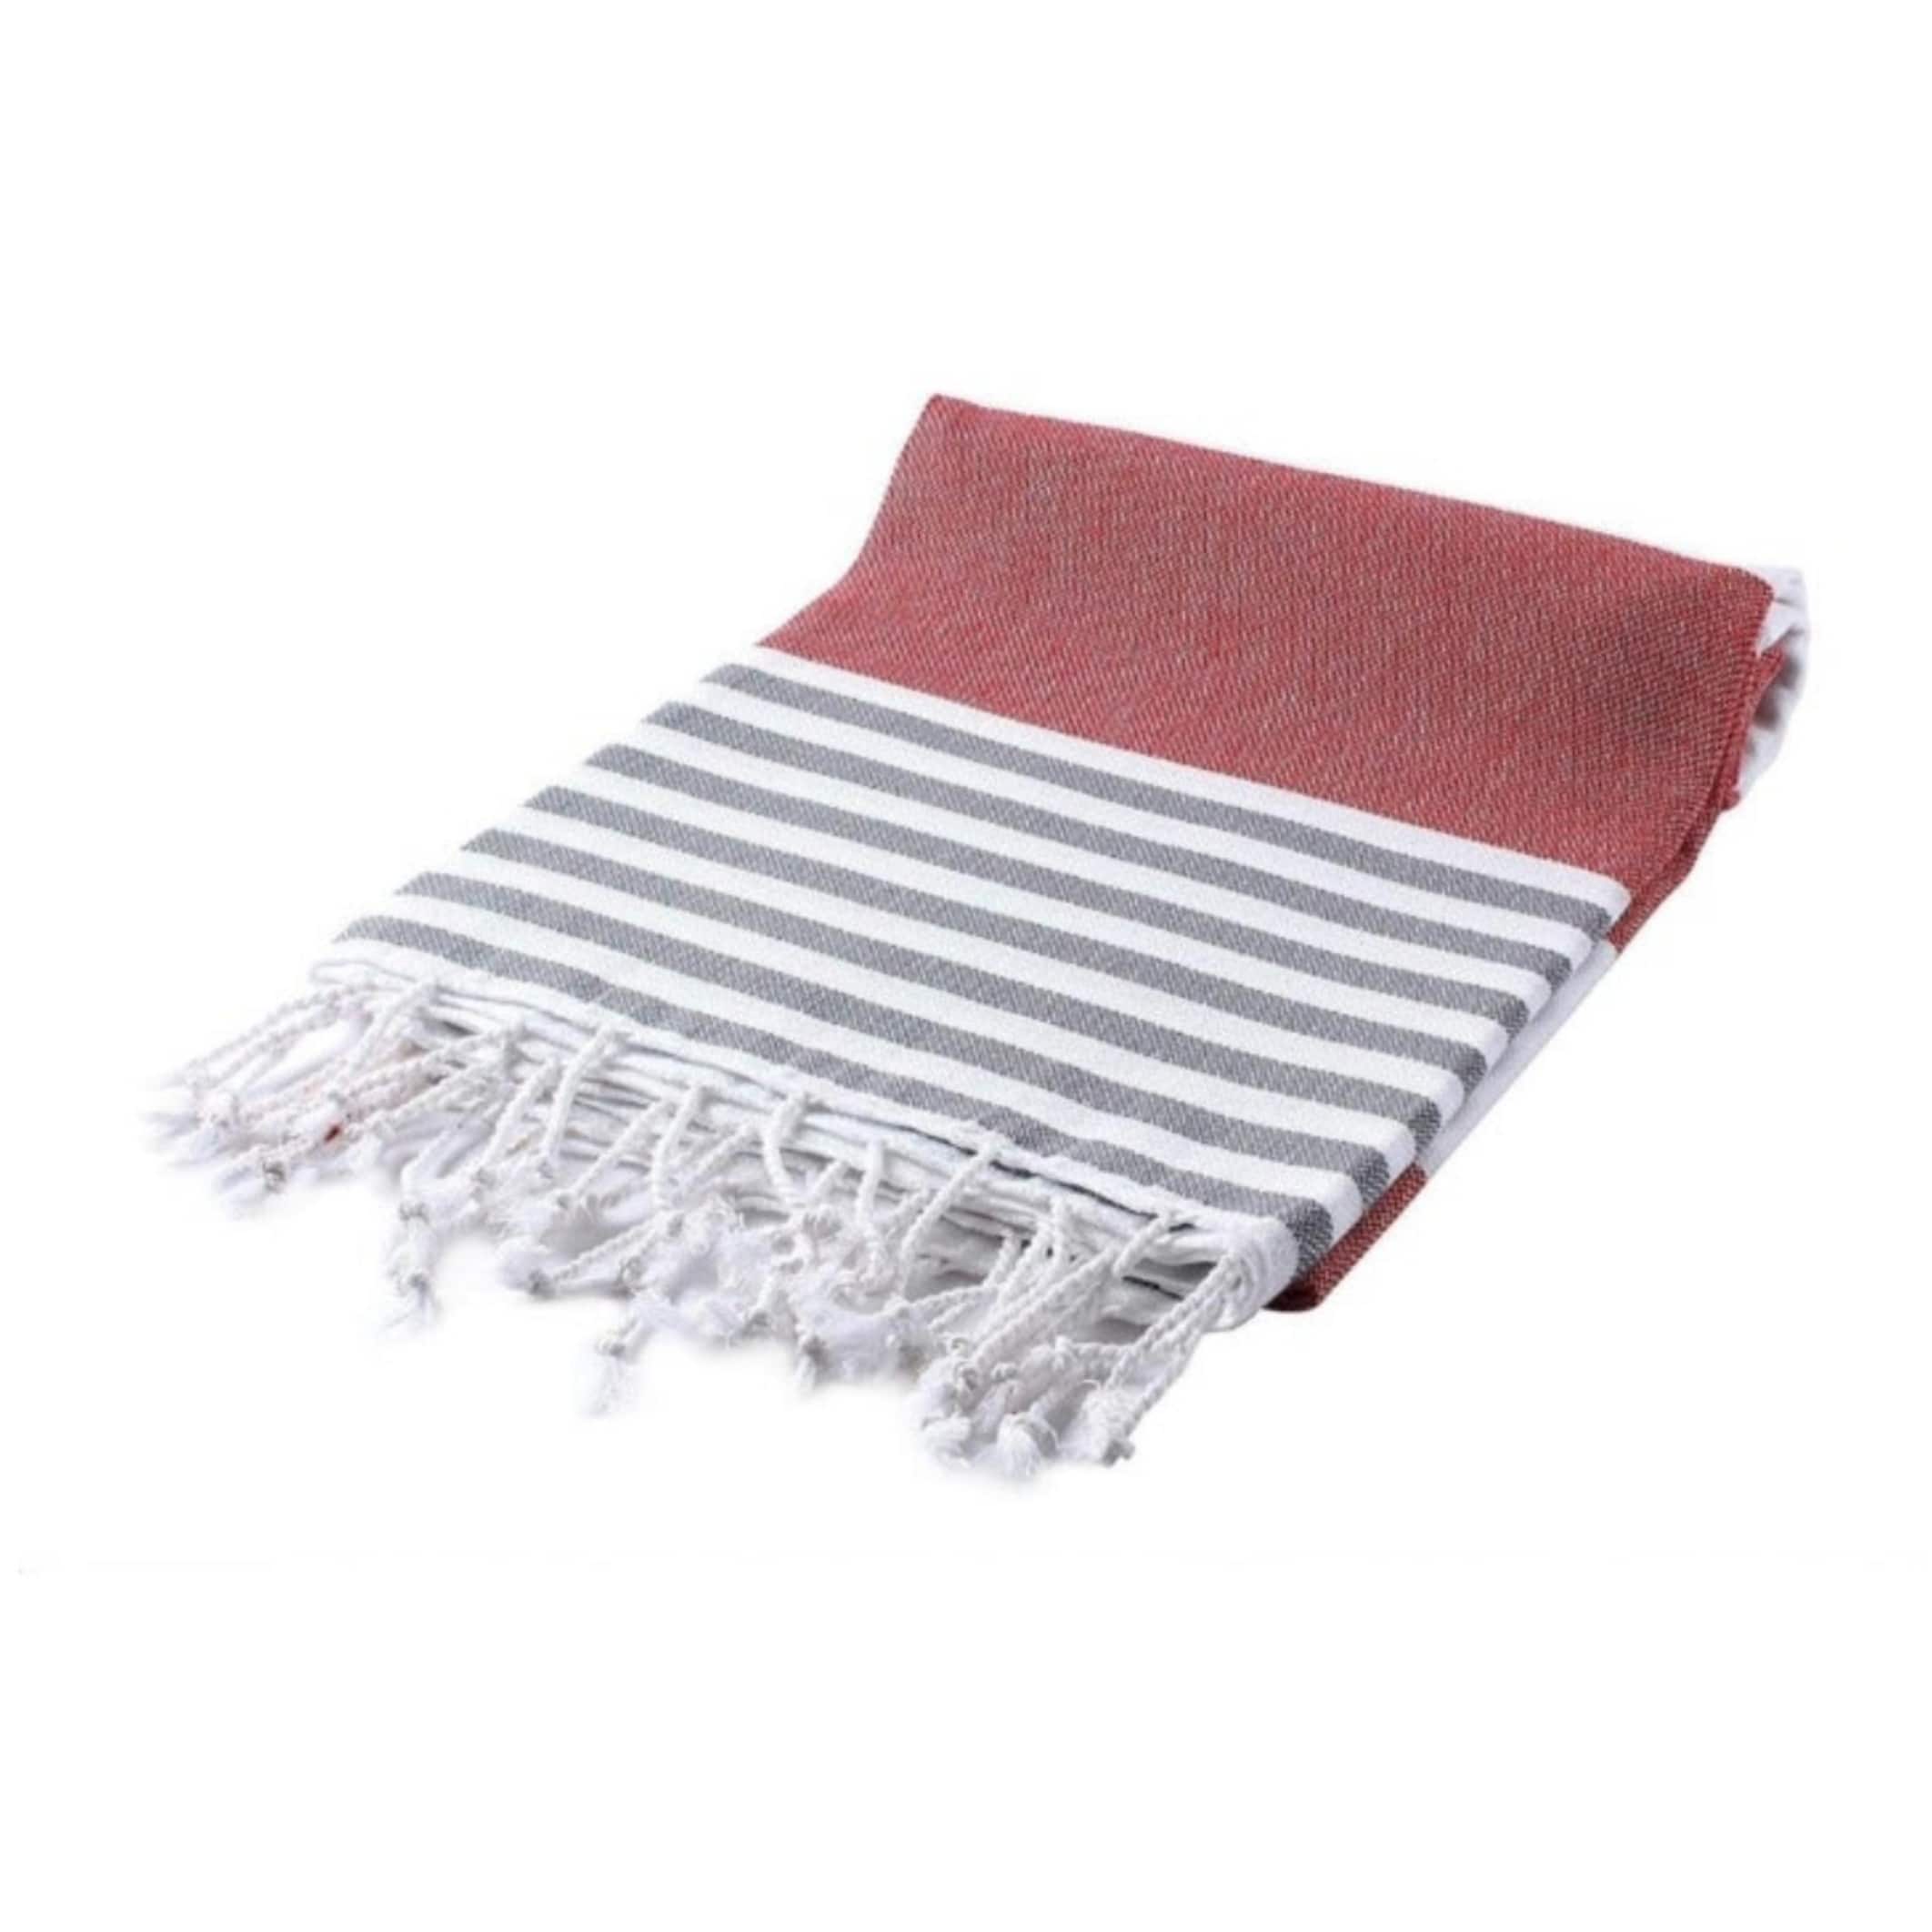 Red Anthracite Beach Towel - Striped Authentic 100% Turkish Cotton ...